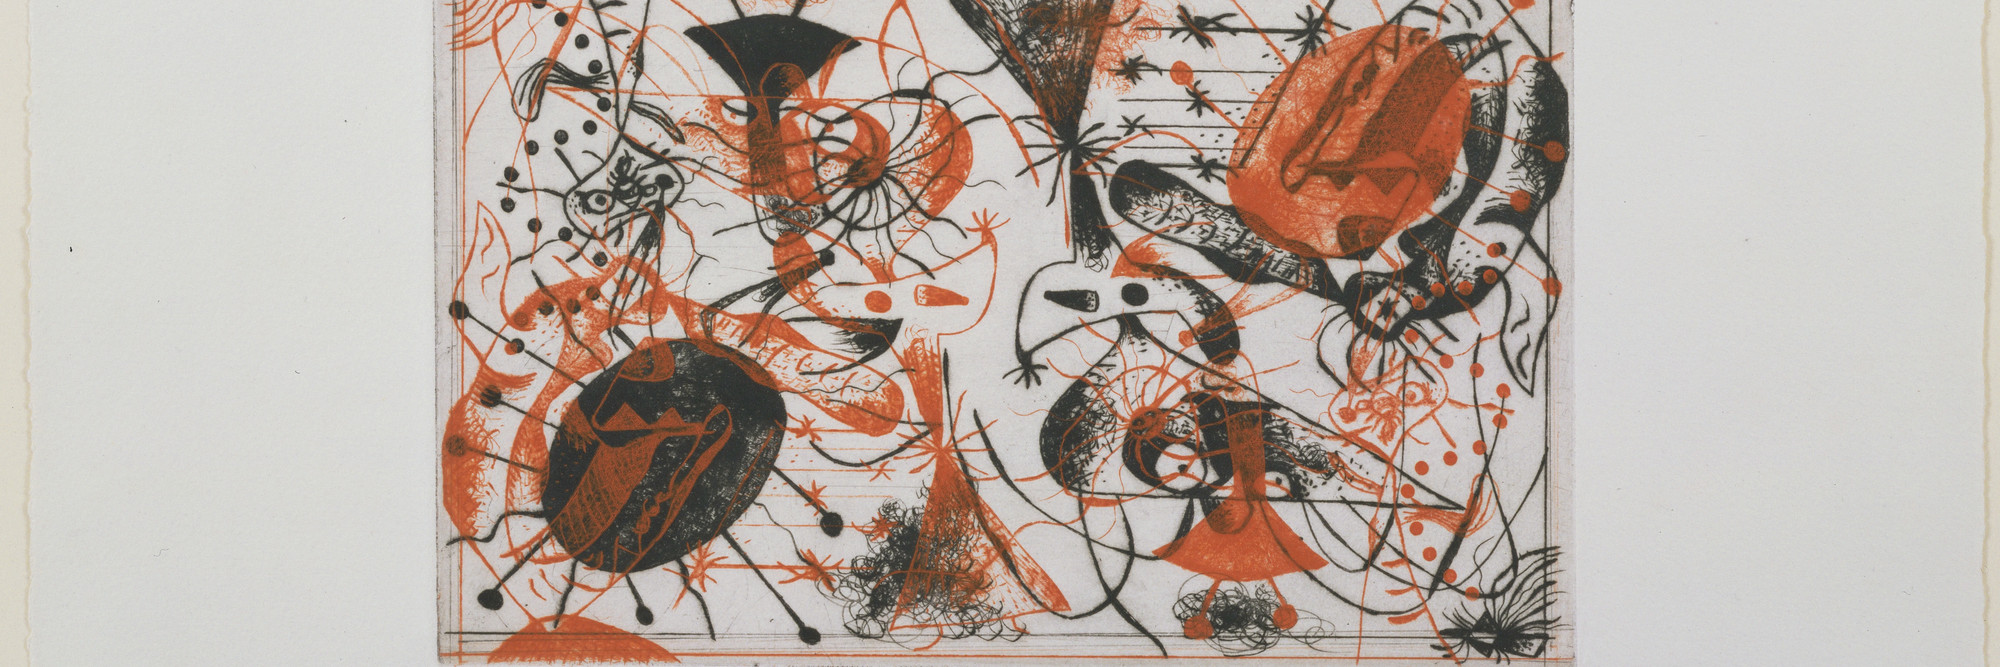 Joan Miró. Plate 8 from Black and Red Series (Série noire et rouge). 1938. Etching, 6 5/8 × 10 1/8ʺ (16.8 × 26.8 cm). Purchased with the Frances Keech Fund and funds given by Agnes Gund and Daniel Shapiro, Gilbert Kaplan, Jeanne C. Thayer, Reba and Dave Williams, Ann and Lee Fensterstock, Linda Barth Goldstein, Walter Bareiss, Mrs. Melville Wakeman Hall, Emily Rauh Pulitzer, and Mr. and Mrs. Herbert D. Schimmel. © 2016 Successió Miró / Artists Rights Society (ARS), New York / ADAGP, Paris